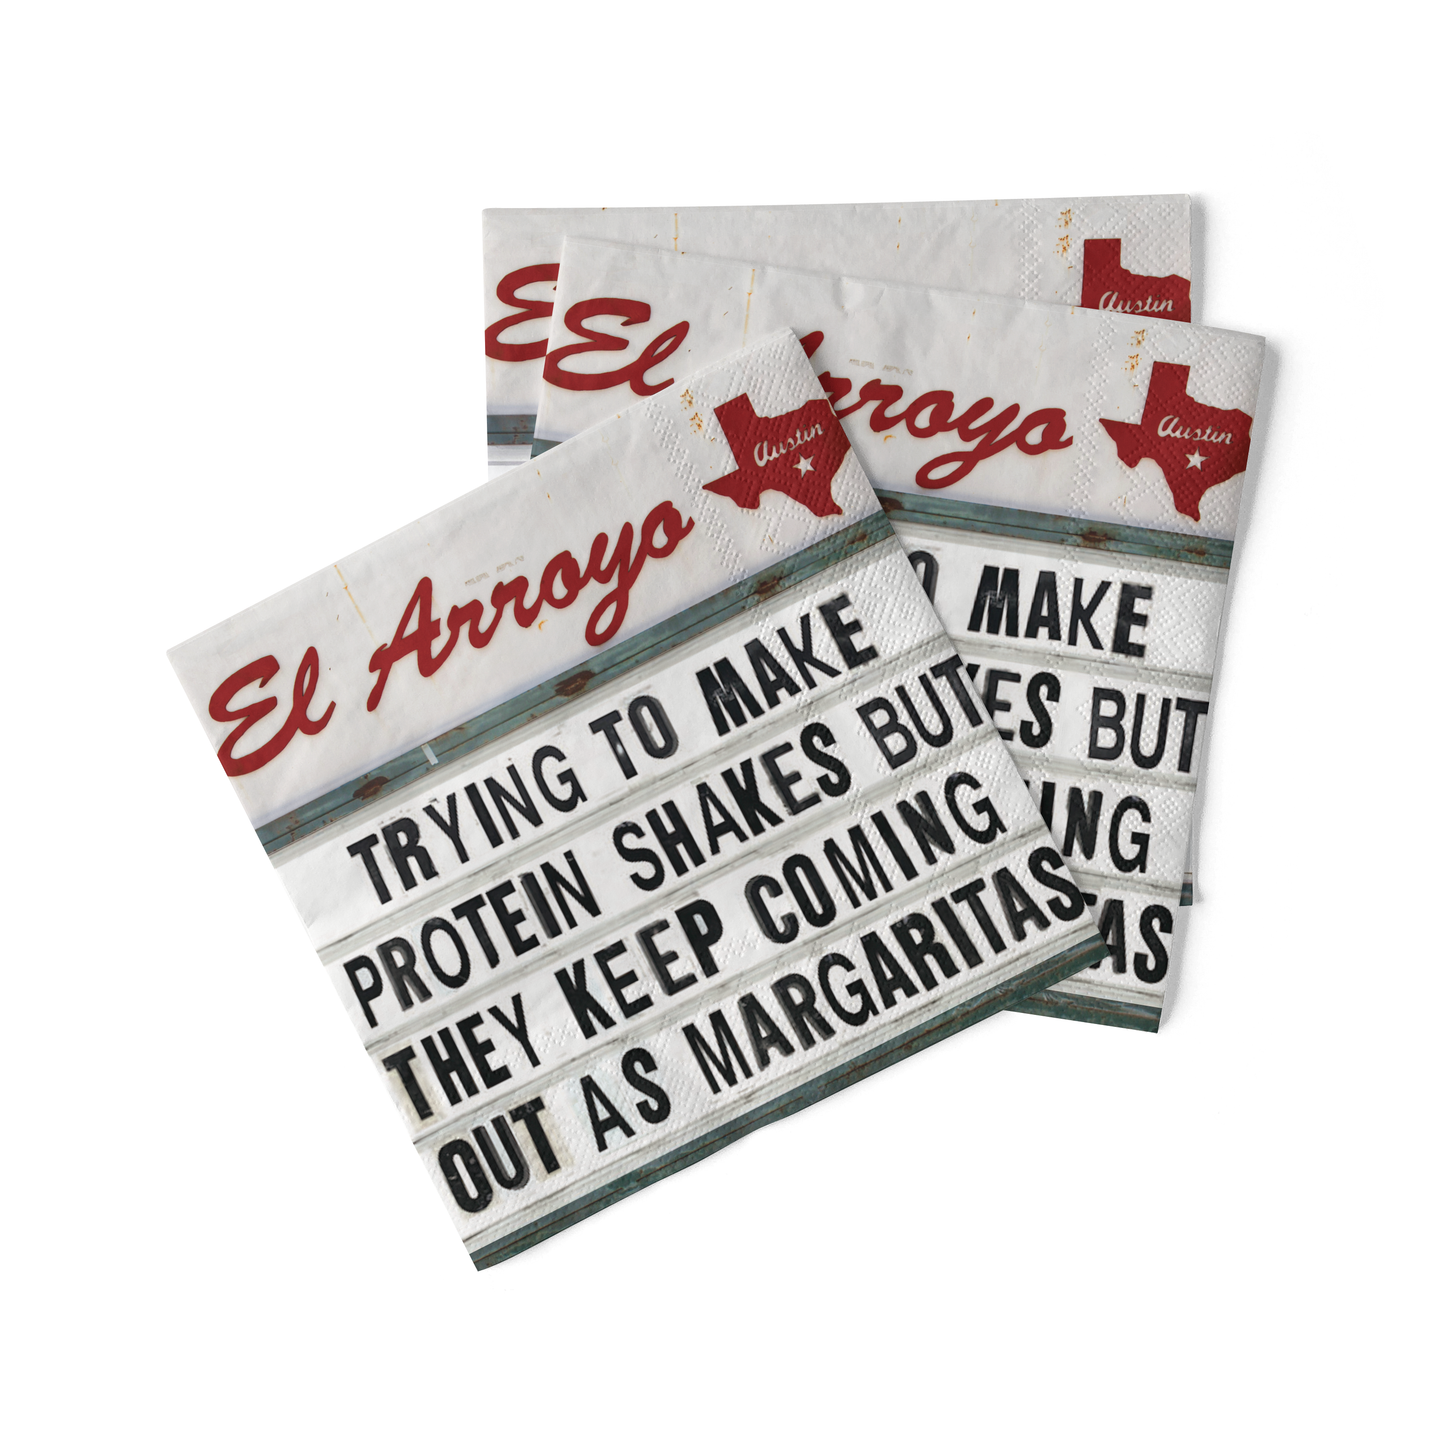 El Arroyo - Cocktail Napkins (Pack of 20) - Protein Shakes